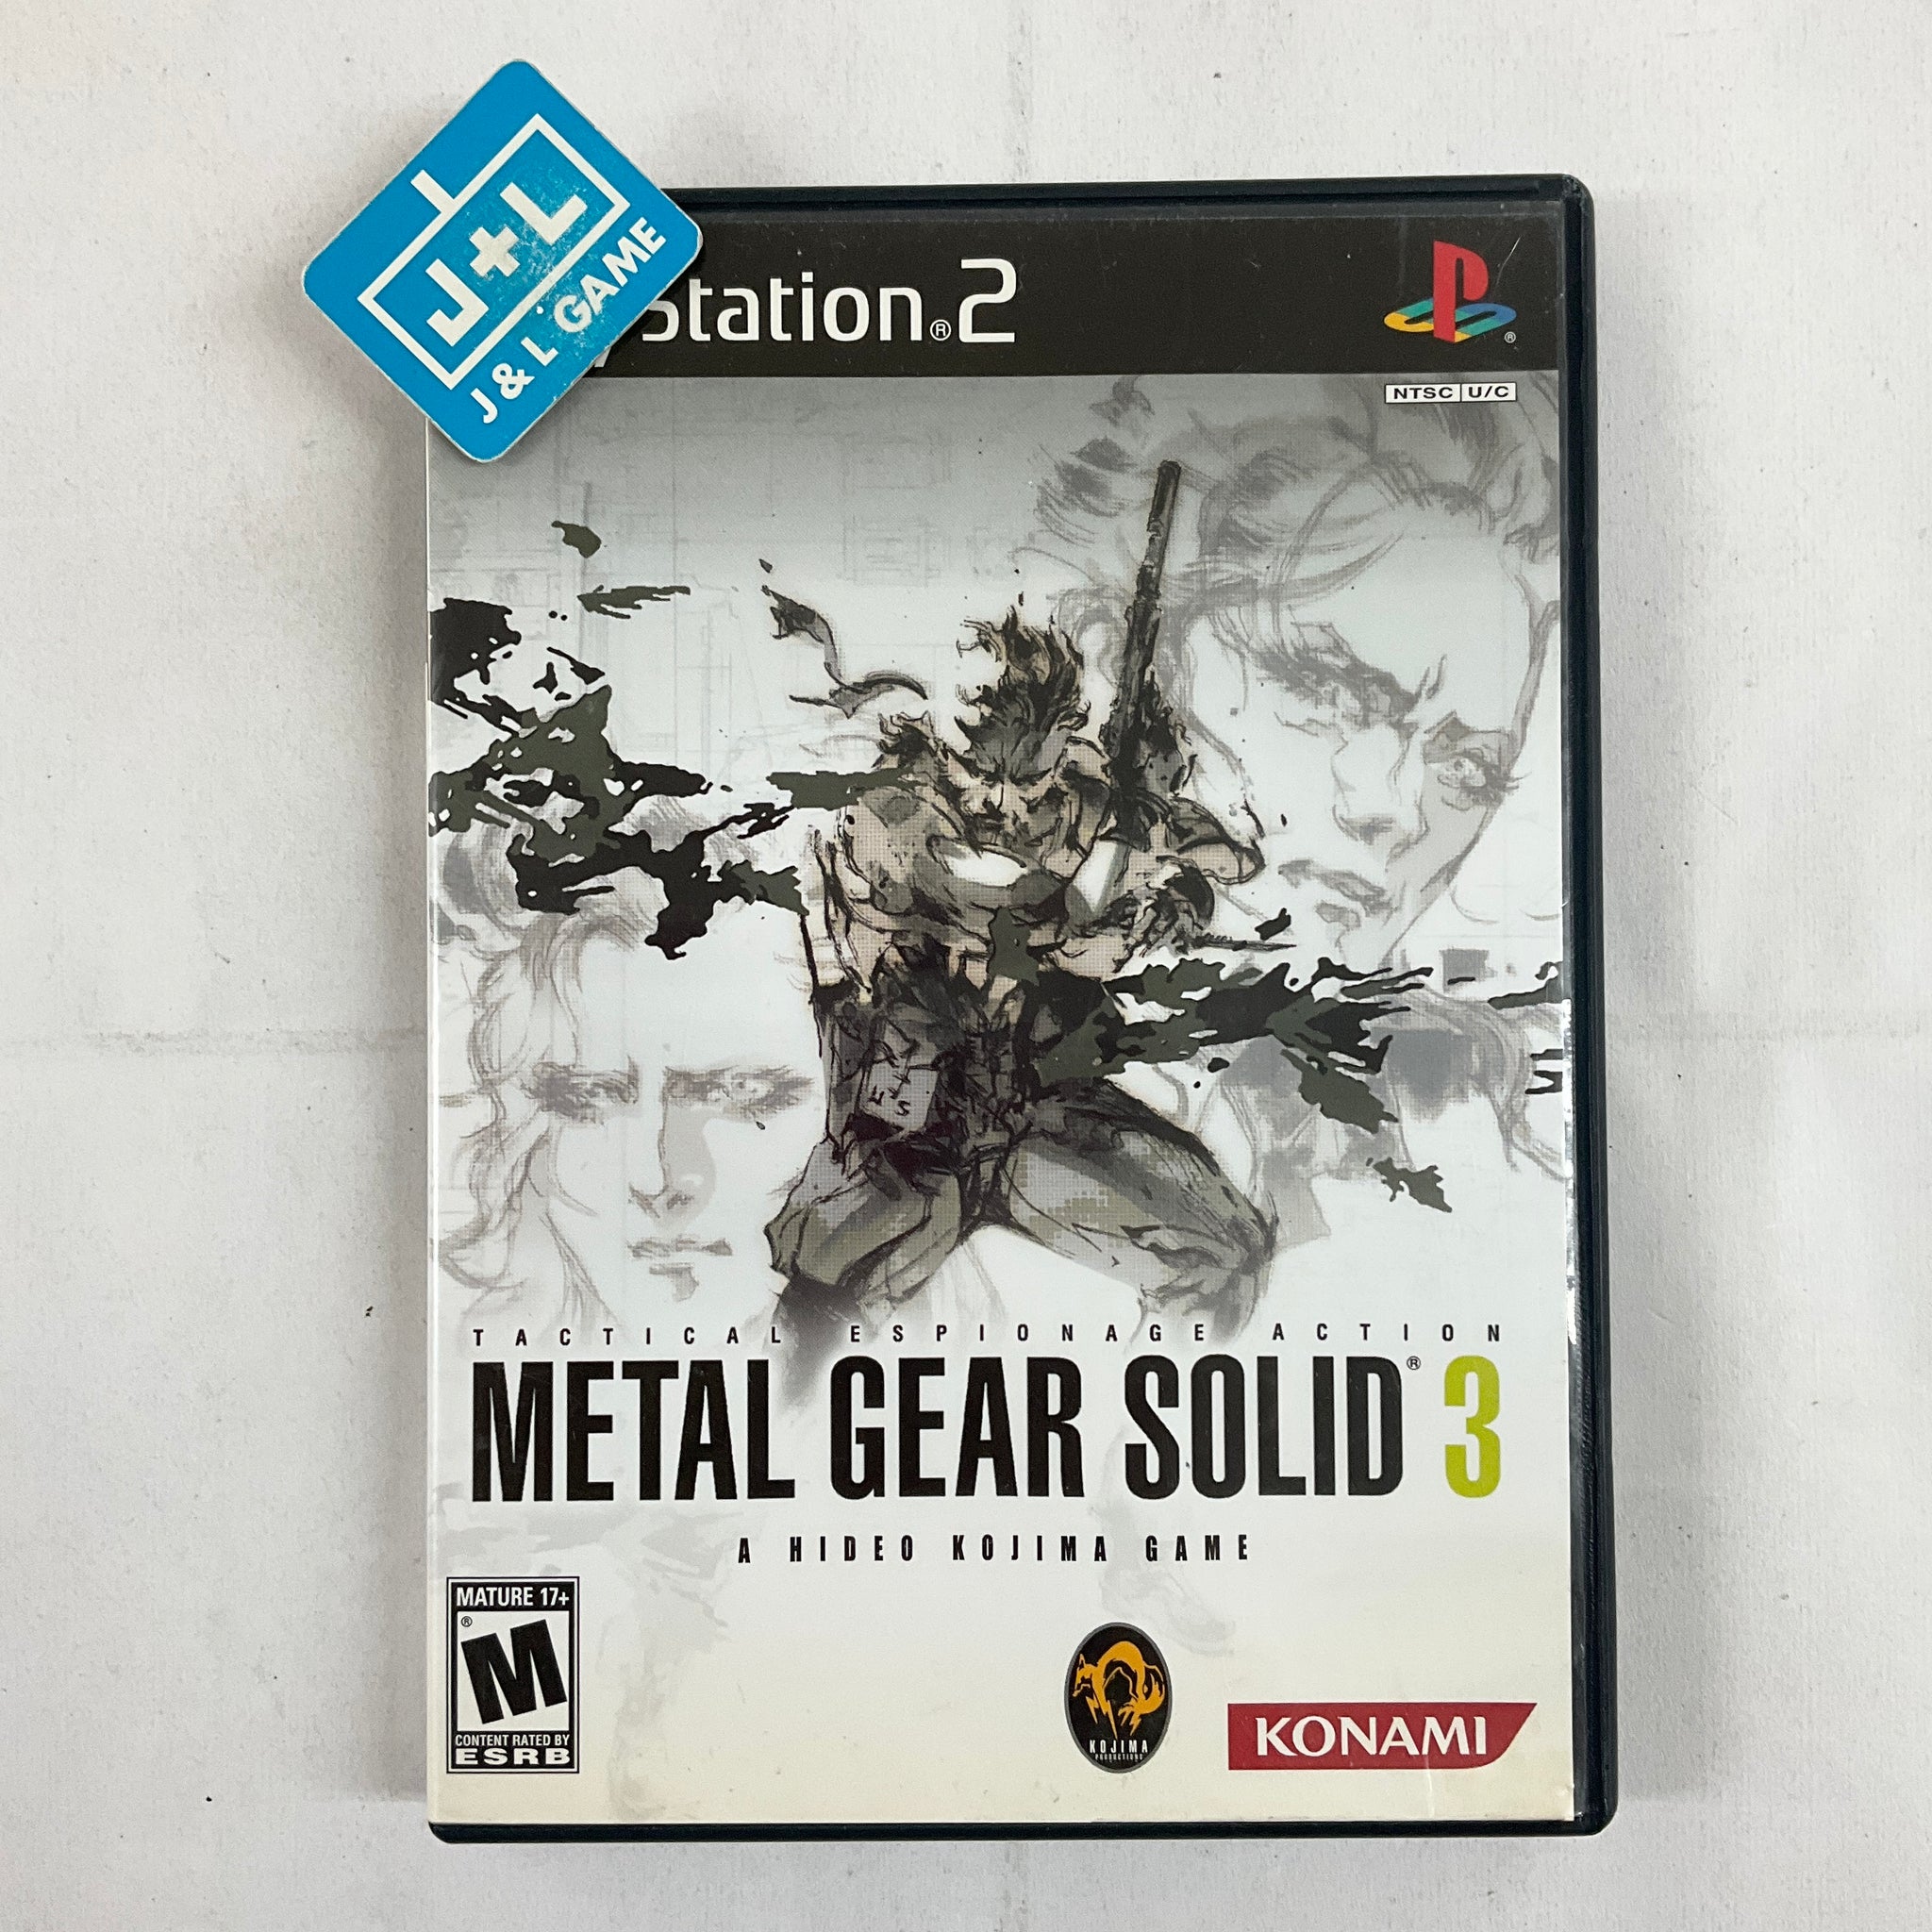 Metal Gear Solid 3 Subsistence PS2 Game For Sale